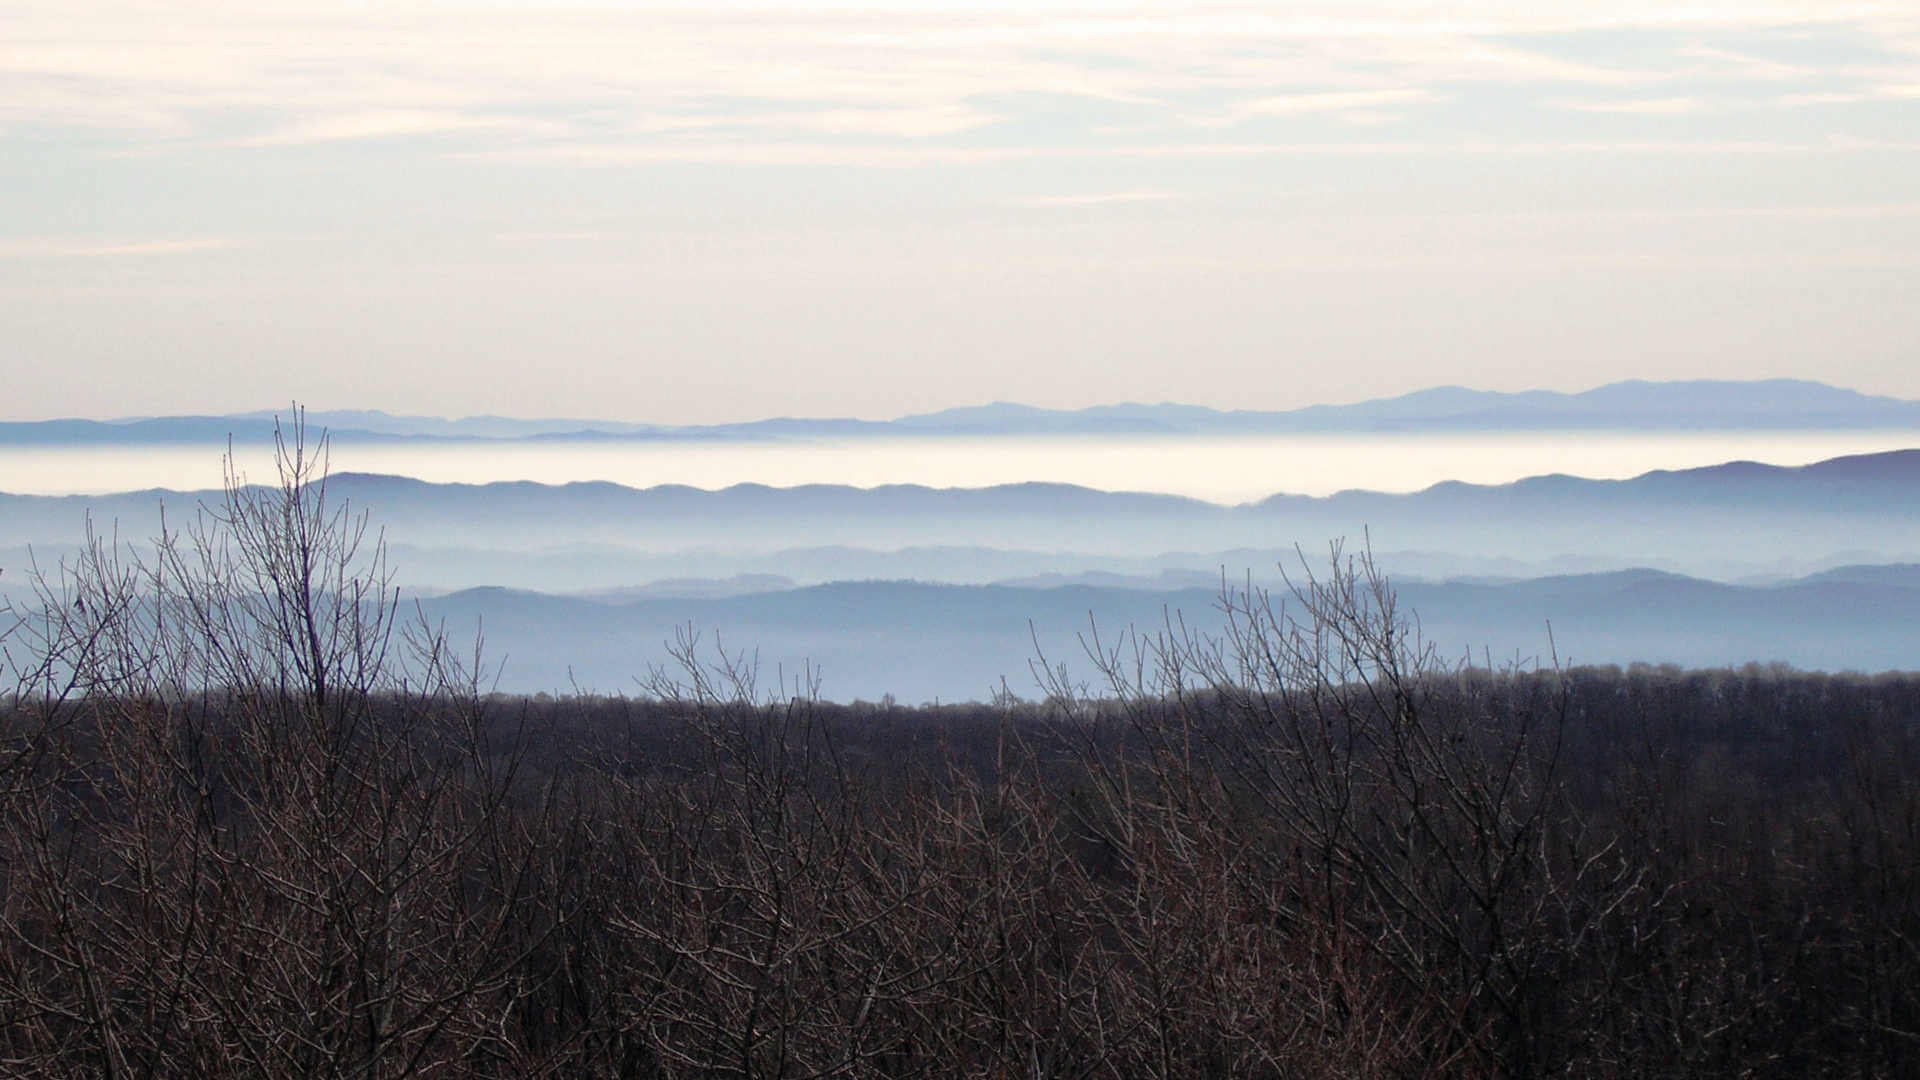 Country life vs city life: Looking out across the hills of Appalachia. Country life gives you space to enjoy in nature!